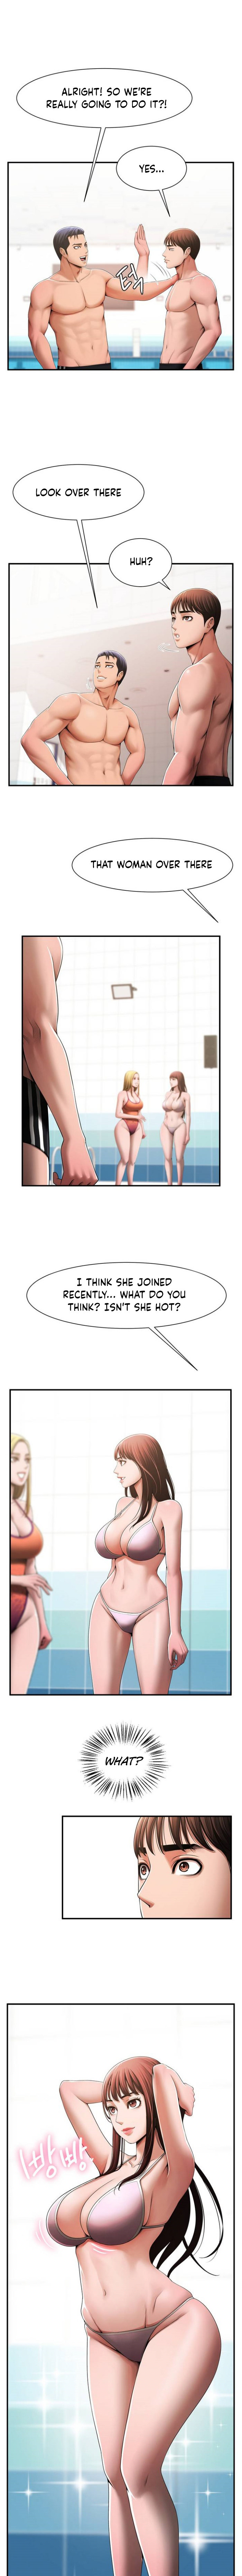 Under the Radar - Chapter 1 Page 14